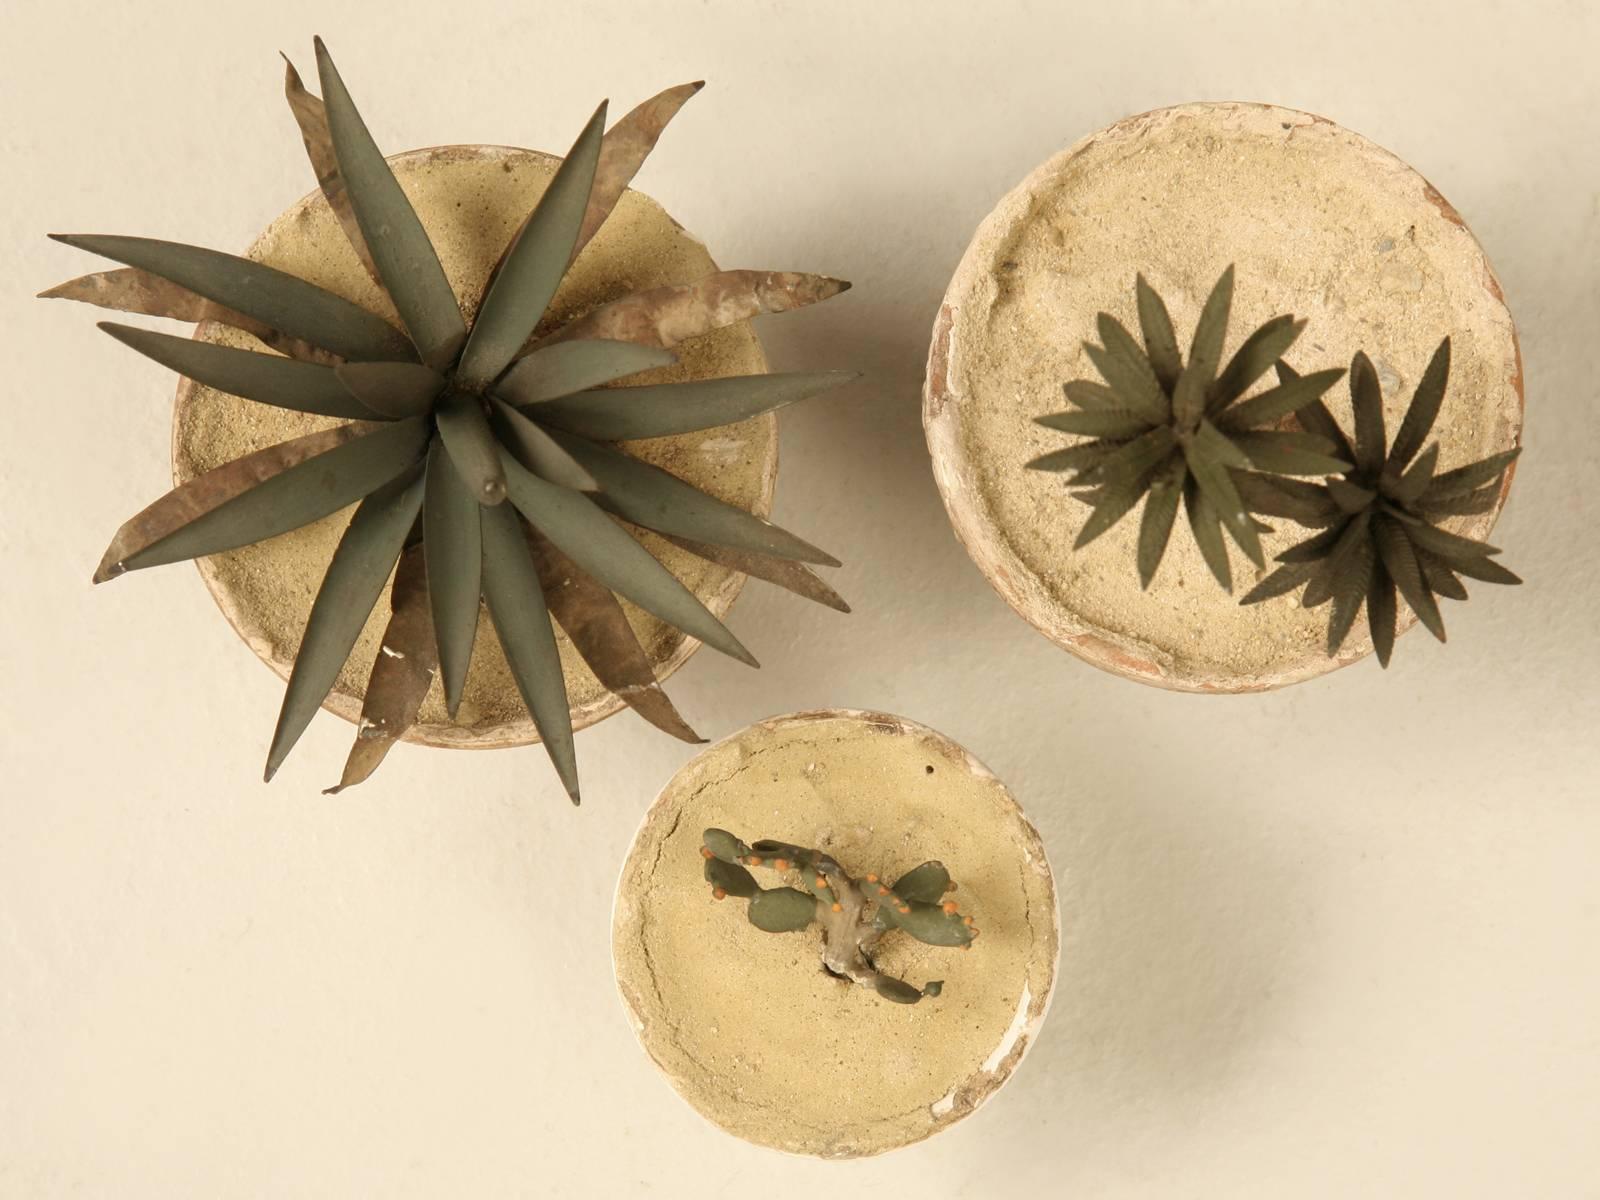 Exquisitely crafted by a French artist, these handmade metal desert plants require no watering and are detailed so carefully that the longer you look, the more you can begin to appreciate them. We can only guess on their age, but about 50 years old